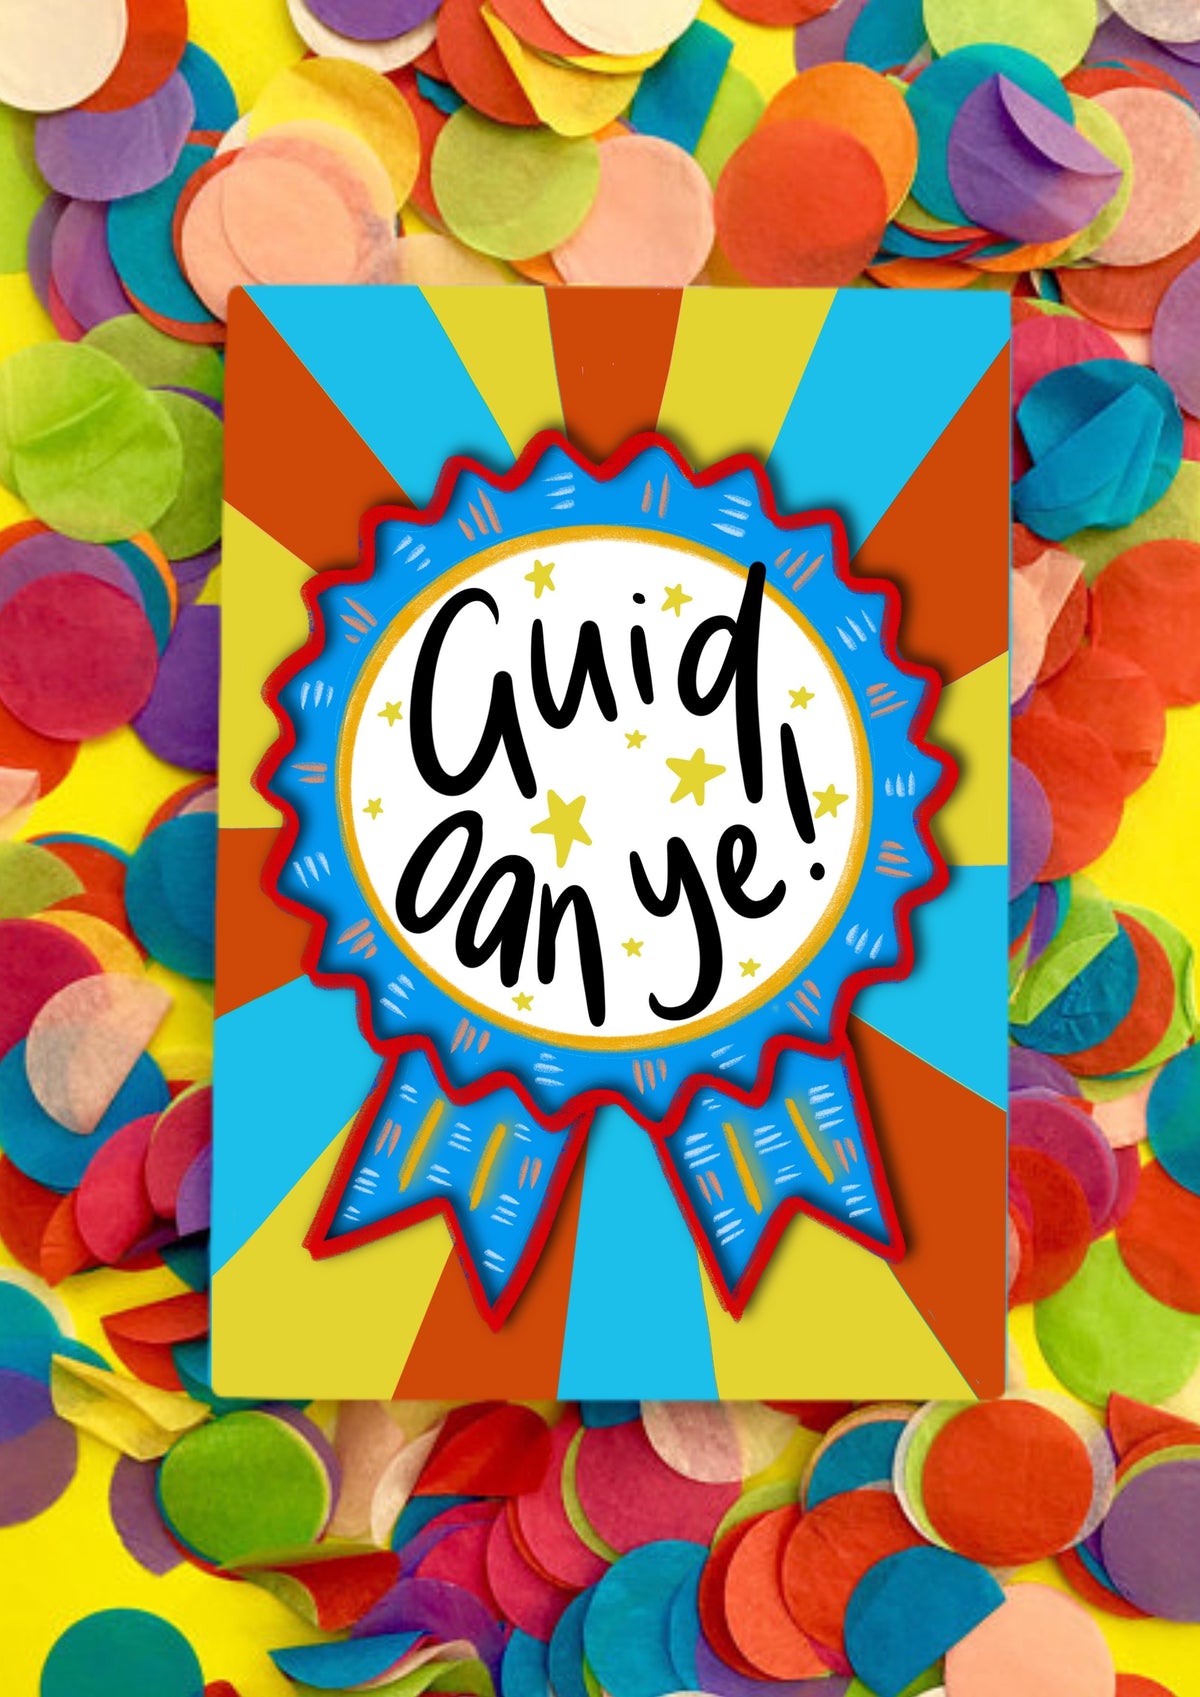 A greetings card with a stripey sunbeam designed background with a large rosette motif. The rosette is royal blue with red edging and has a large white circle in the middle that has the words handwritten &#39;guid oan ye&#39;. The card is lying on a bed of rainbow confetti.